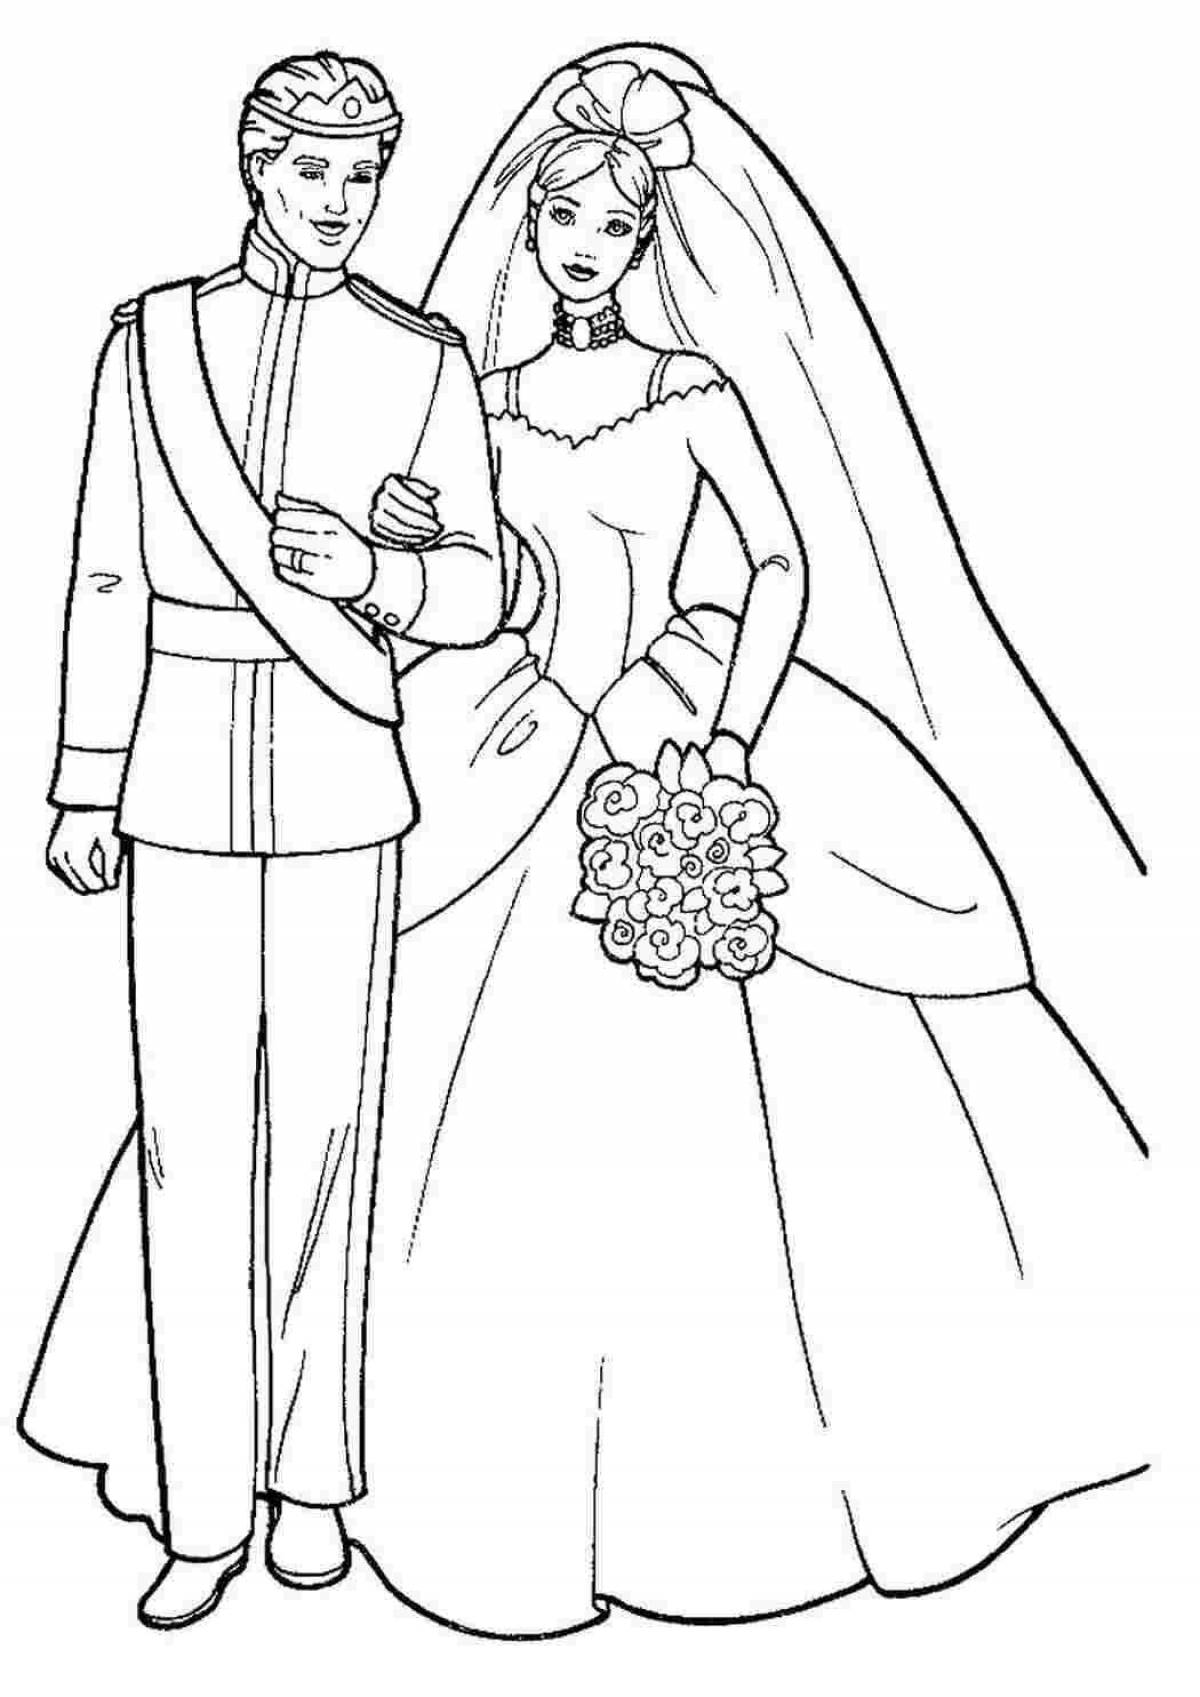 Fantastic bride and groom coloring page